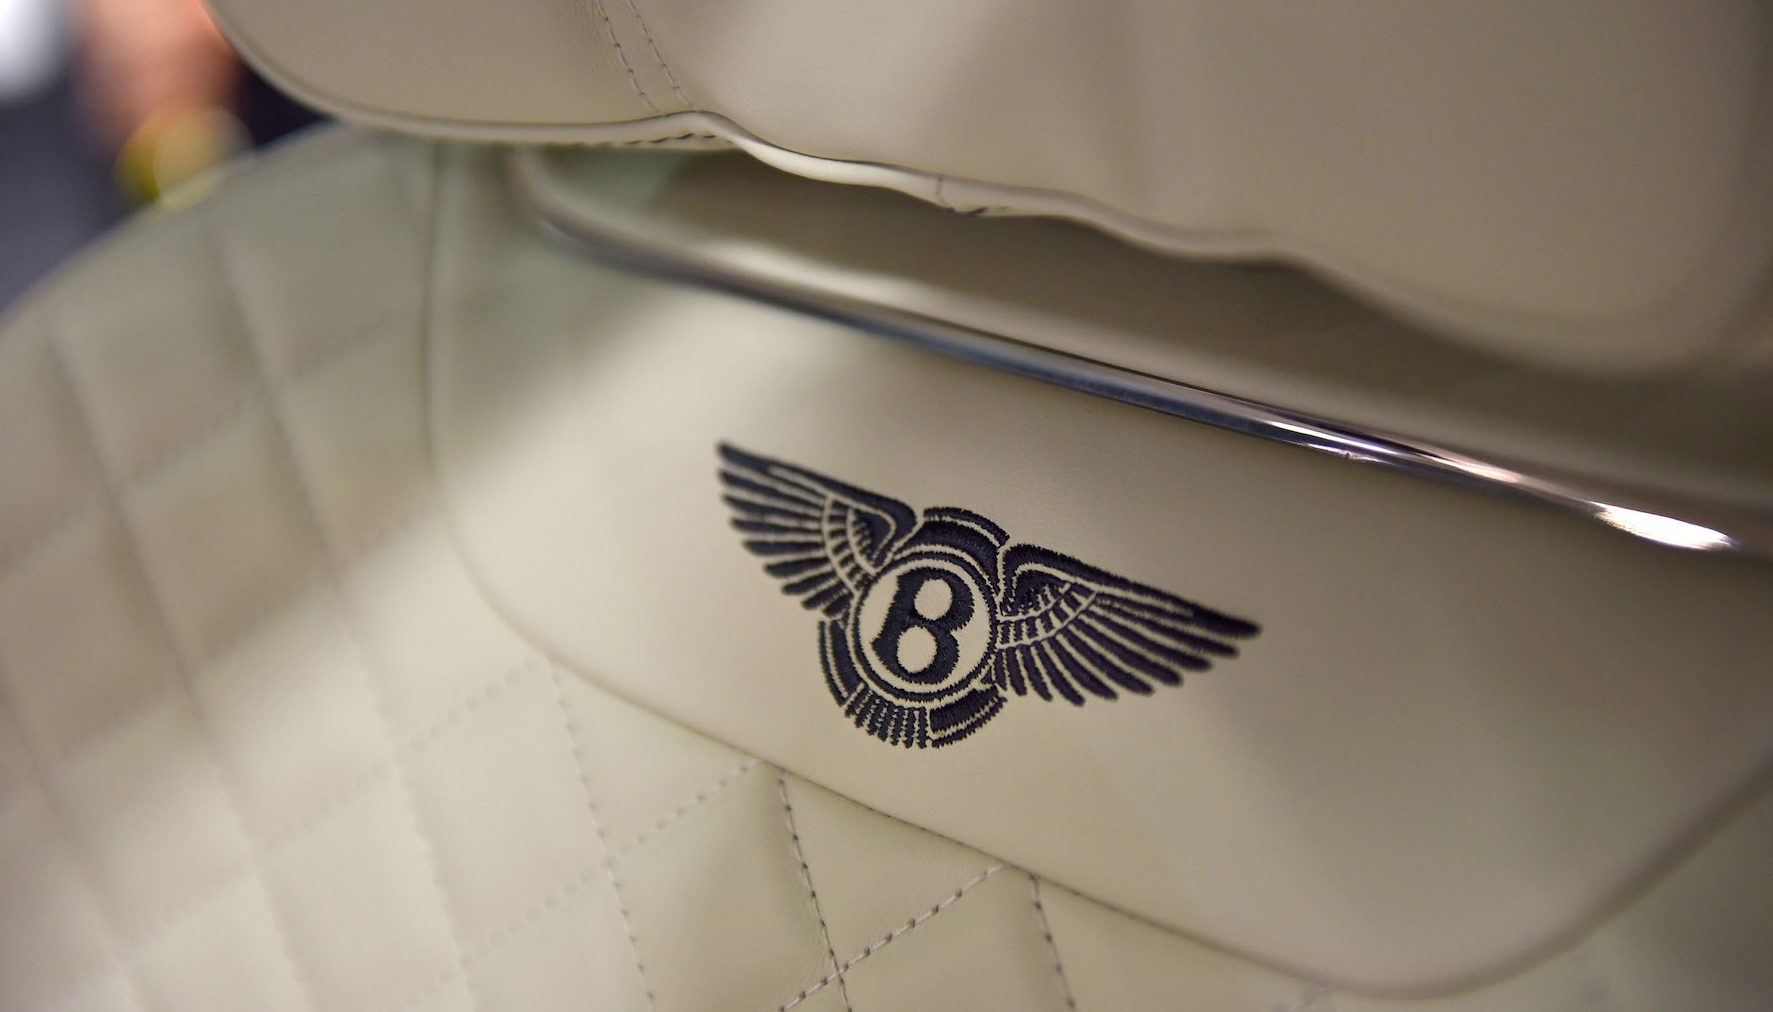  A logo on the interior of a Bentley Bentayga on display at the London Motor Show. (John Keeble/Getty Images)